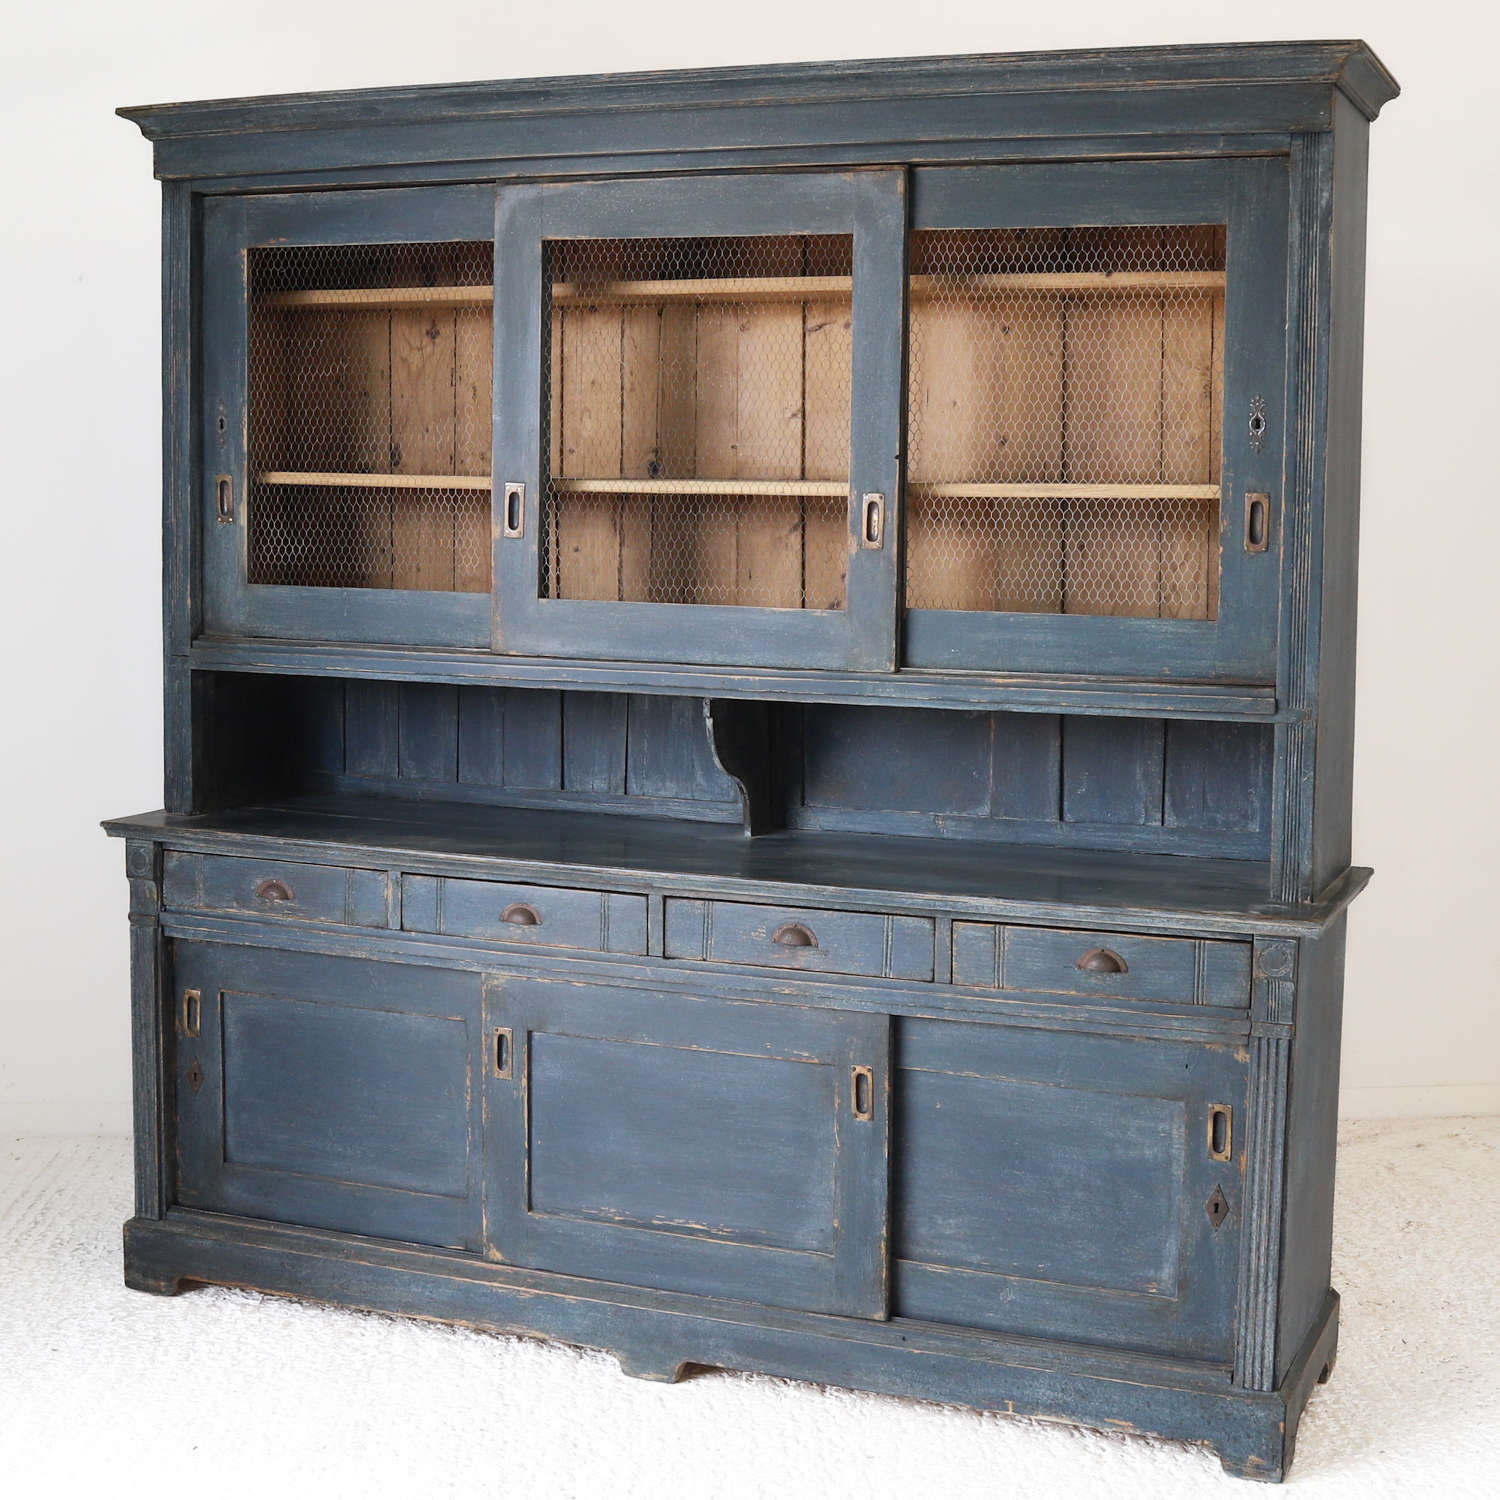 Early 20th Century Pine Butler's Pantry Dresser later painted